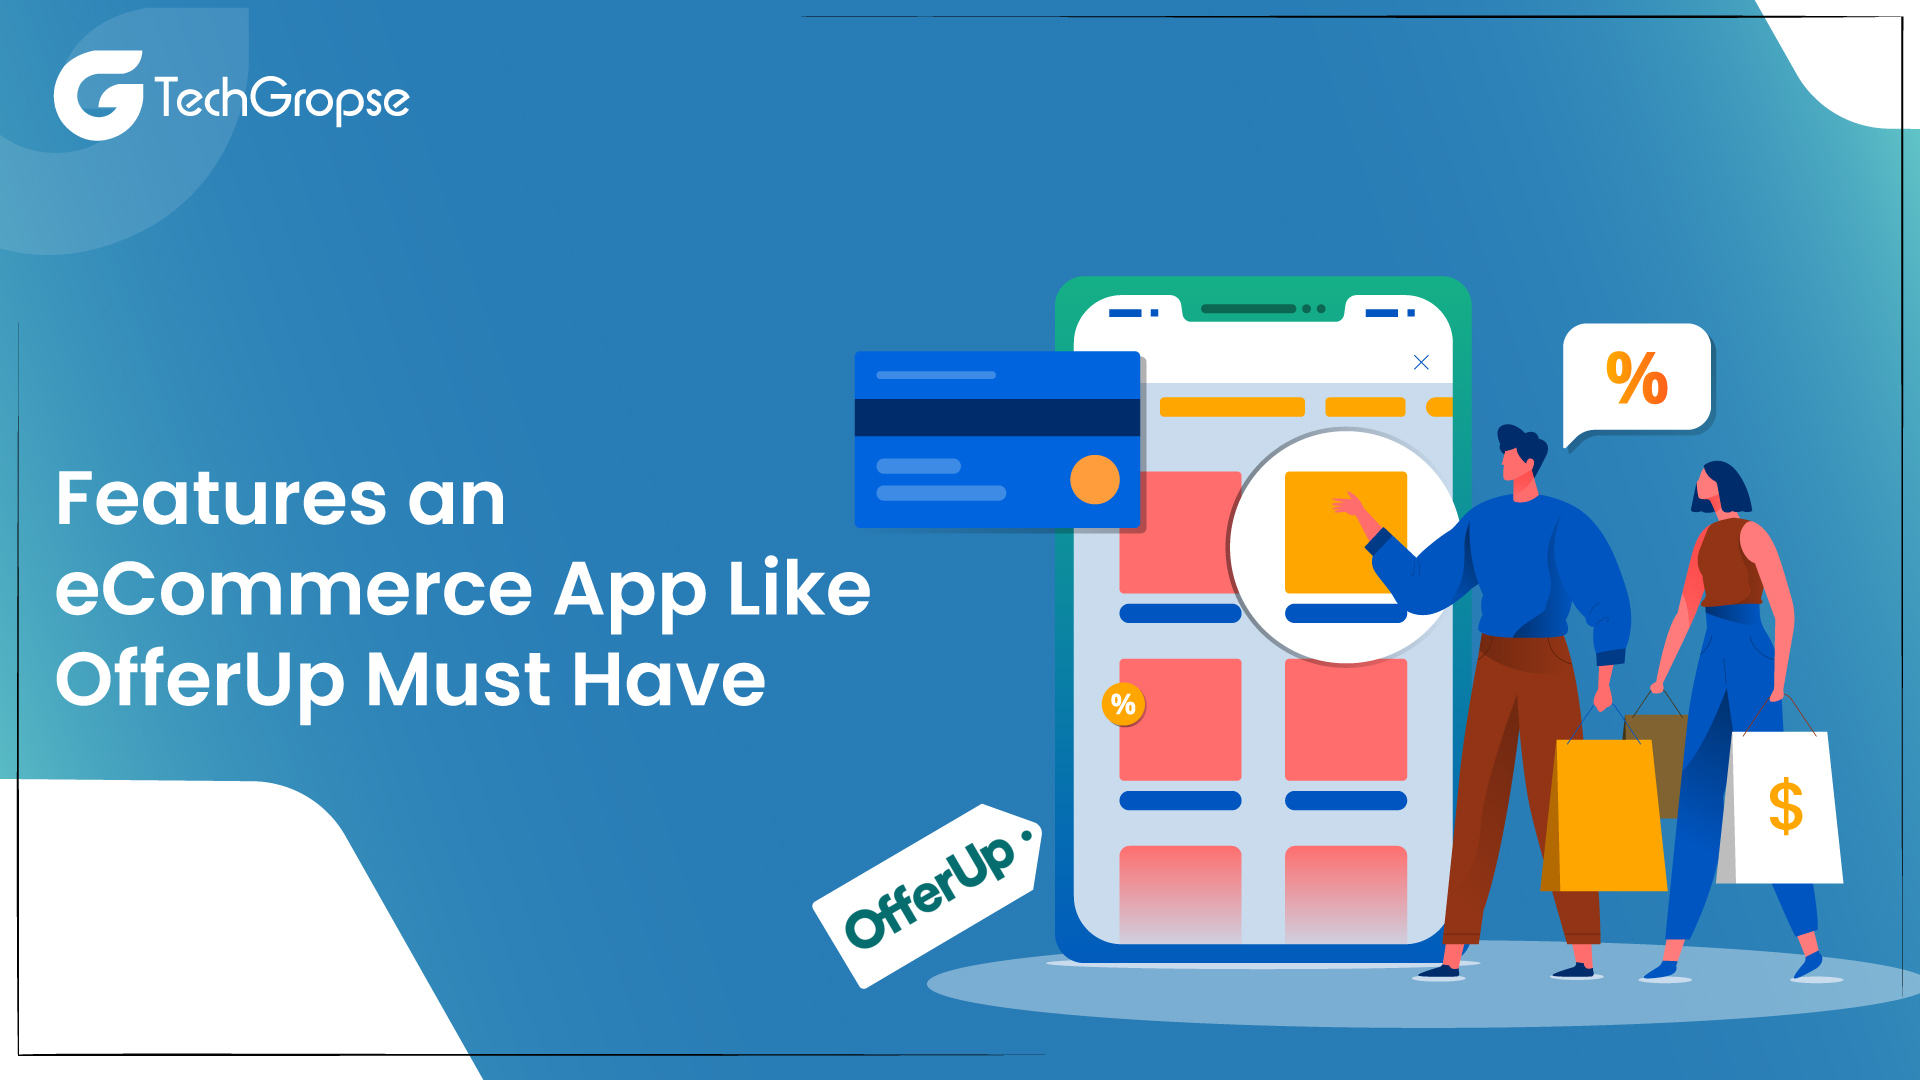 Features an eCommerce App Like OfferUp Must Have